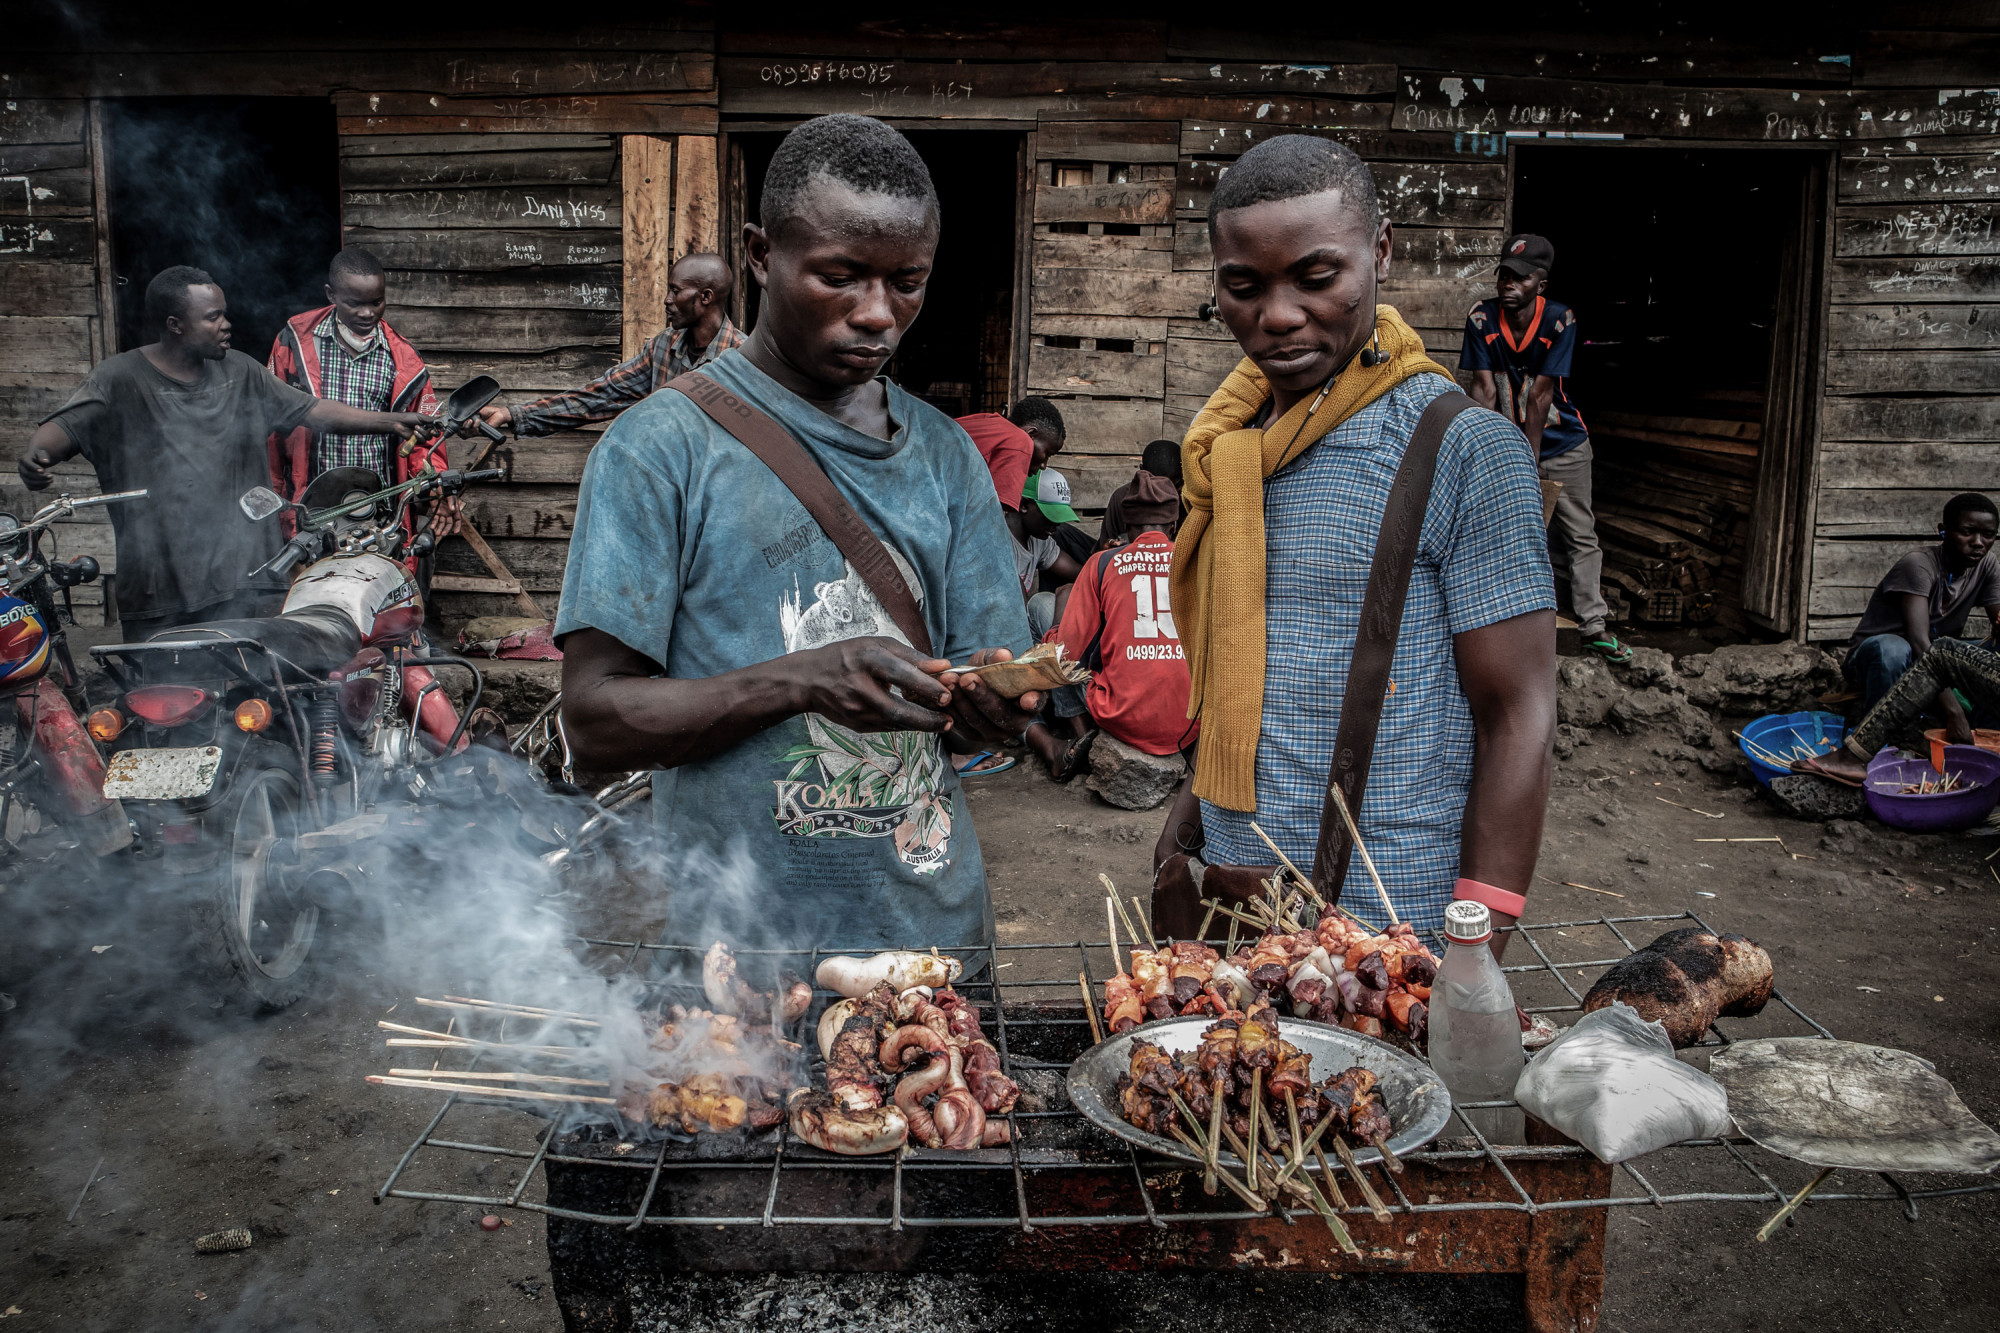 Goma surroundings, DRC, December 2020. Balume Benjamin, 19, (L), sells brochettes cooked on a charcoal grill on the roadside outside the eastern Congolese city of Goma. © Guerchom Ndebo for Fondation Carmignac